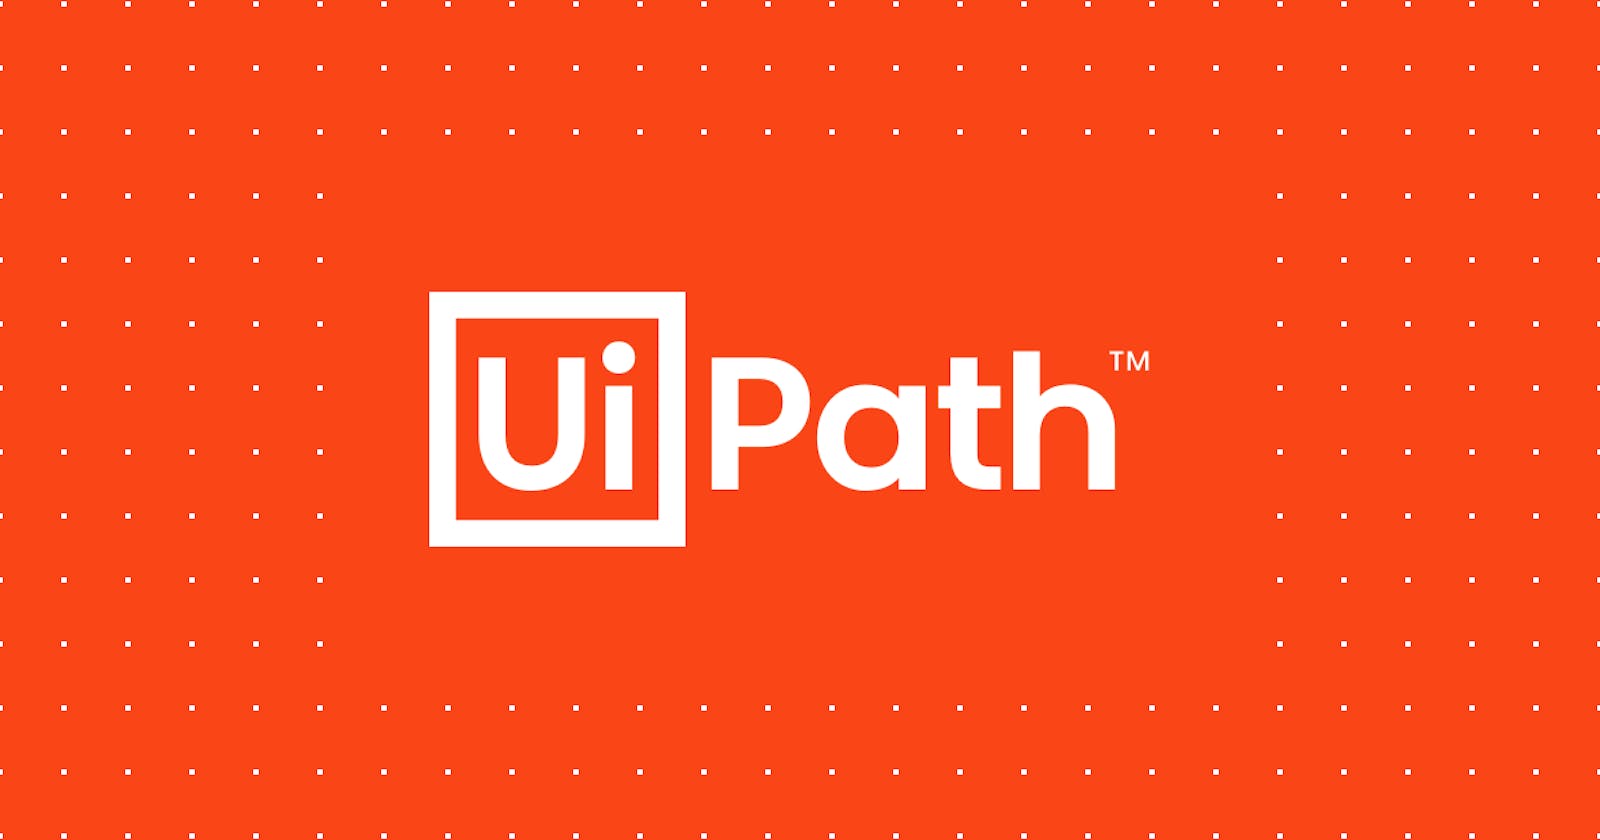 UiPath: The Leading Technology